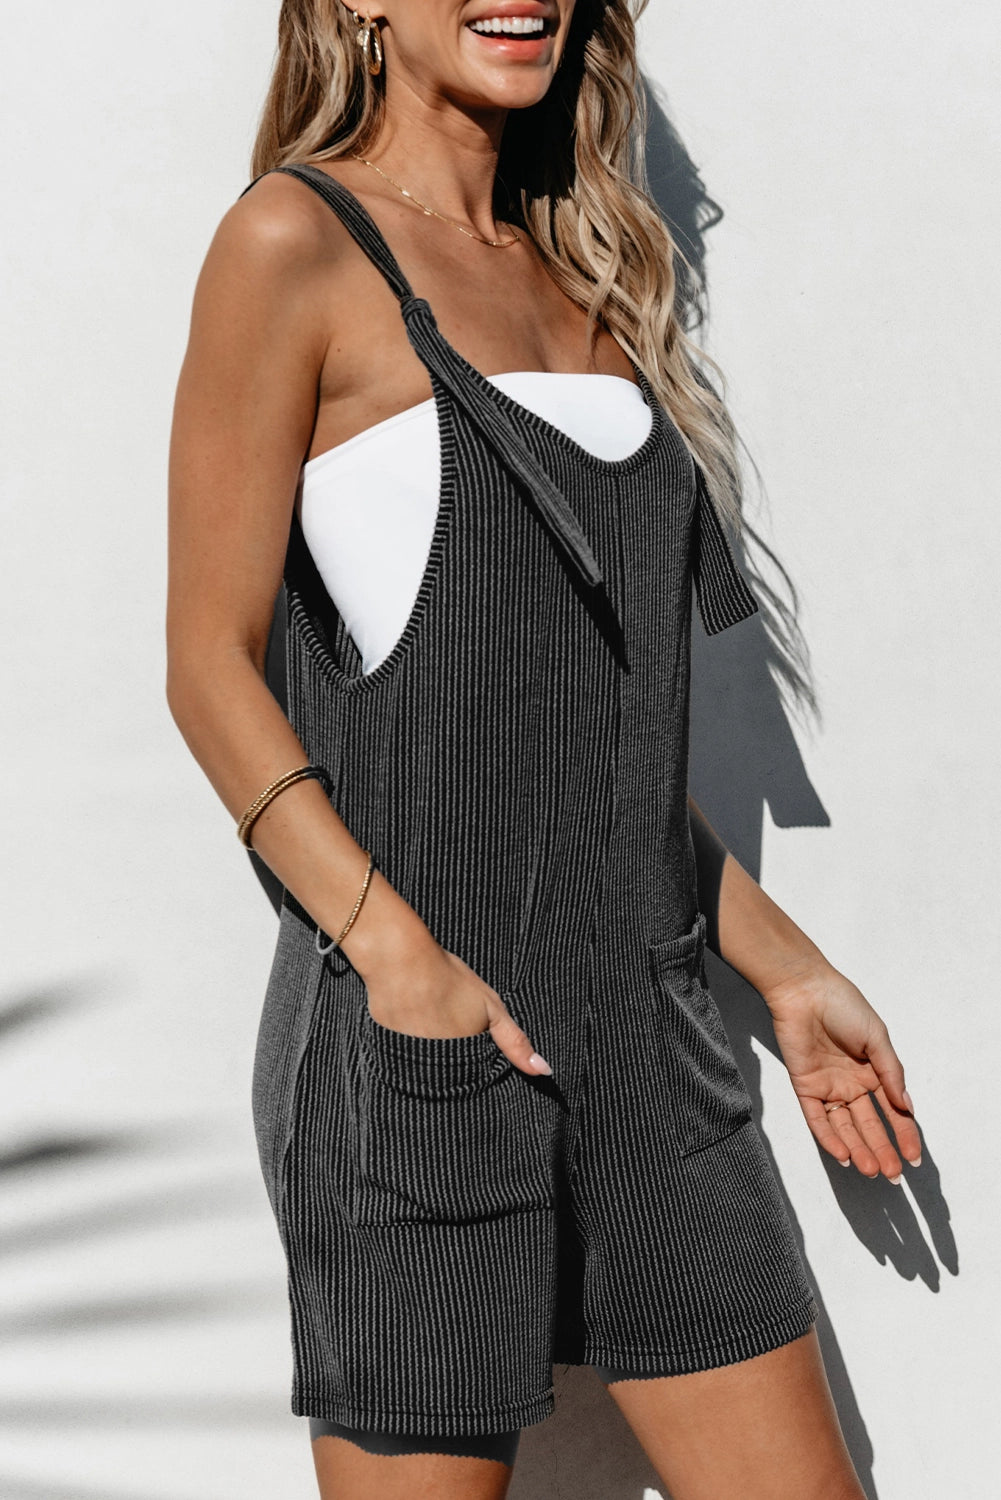 Striped Knotted Romper - Rhode Island Surf Co.